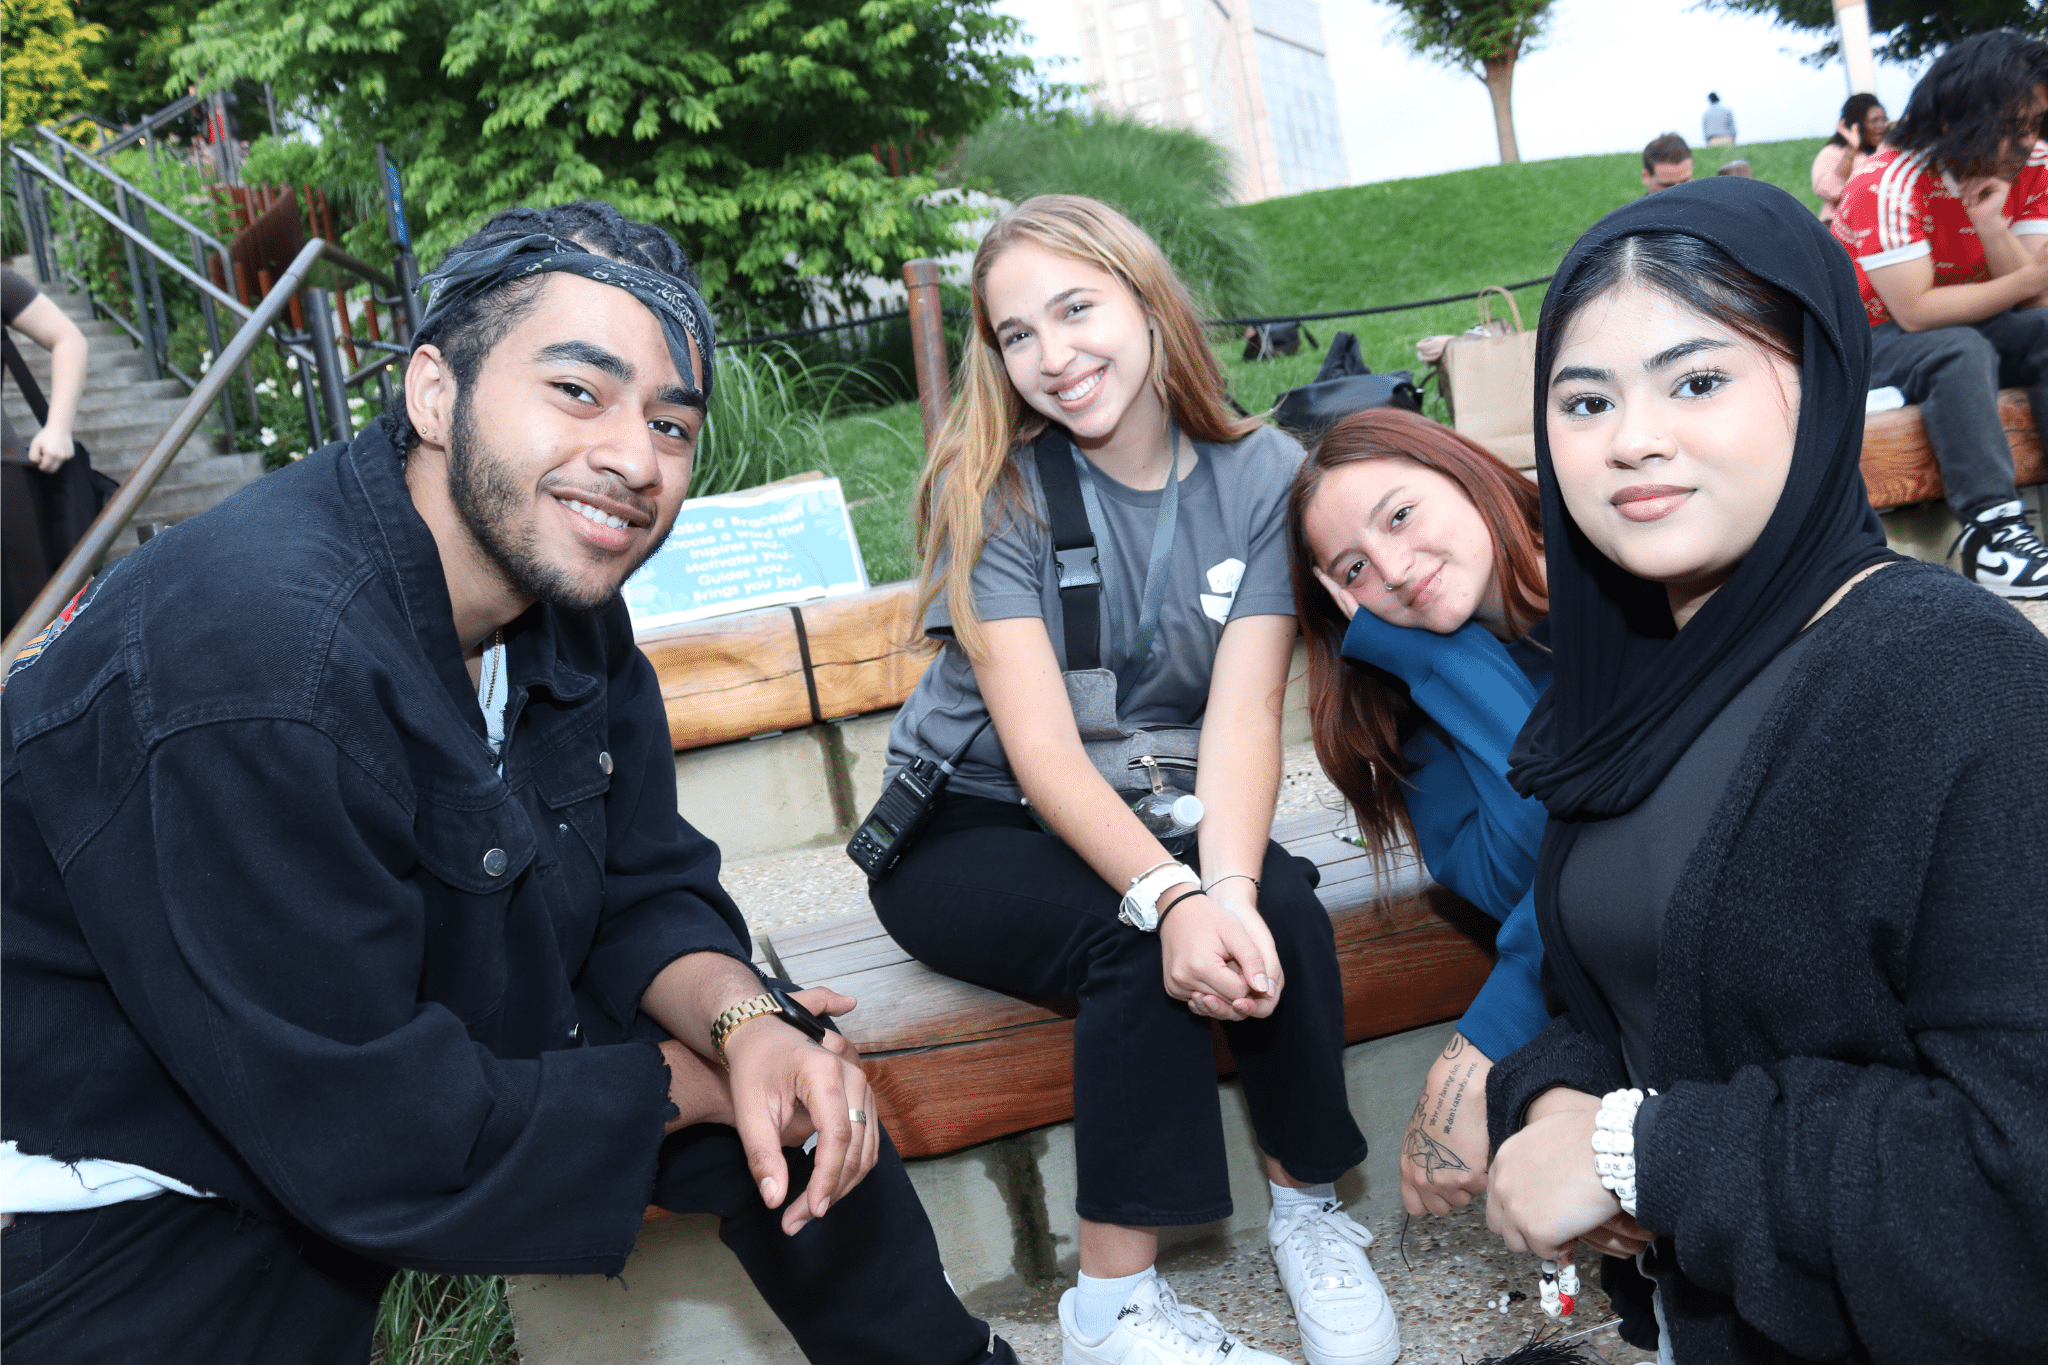 Four smiling teenagers of different races sit on a bench in a green park.